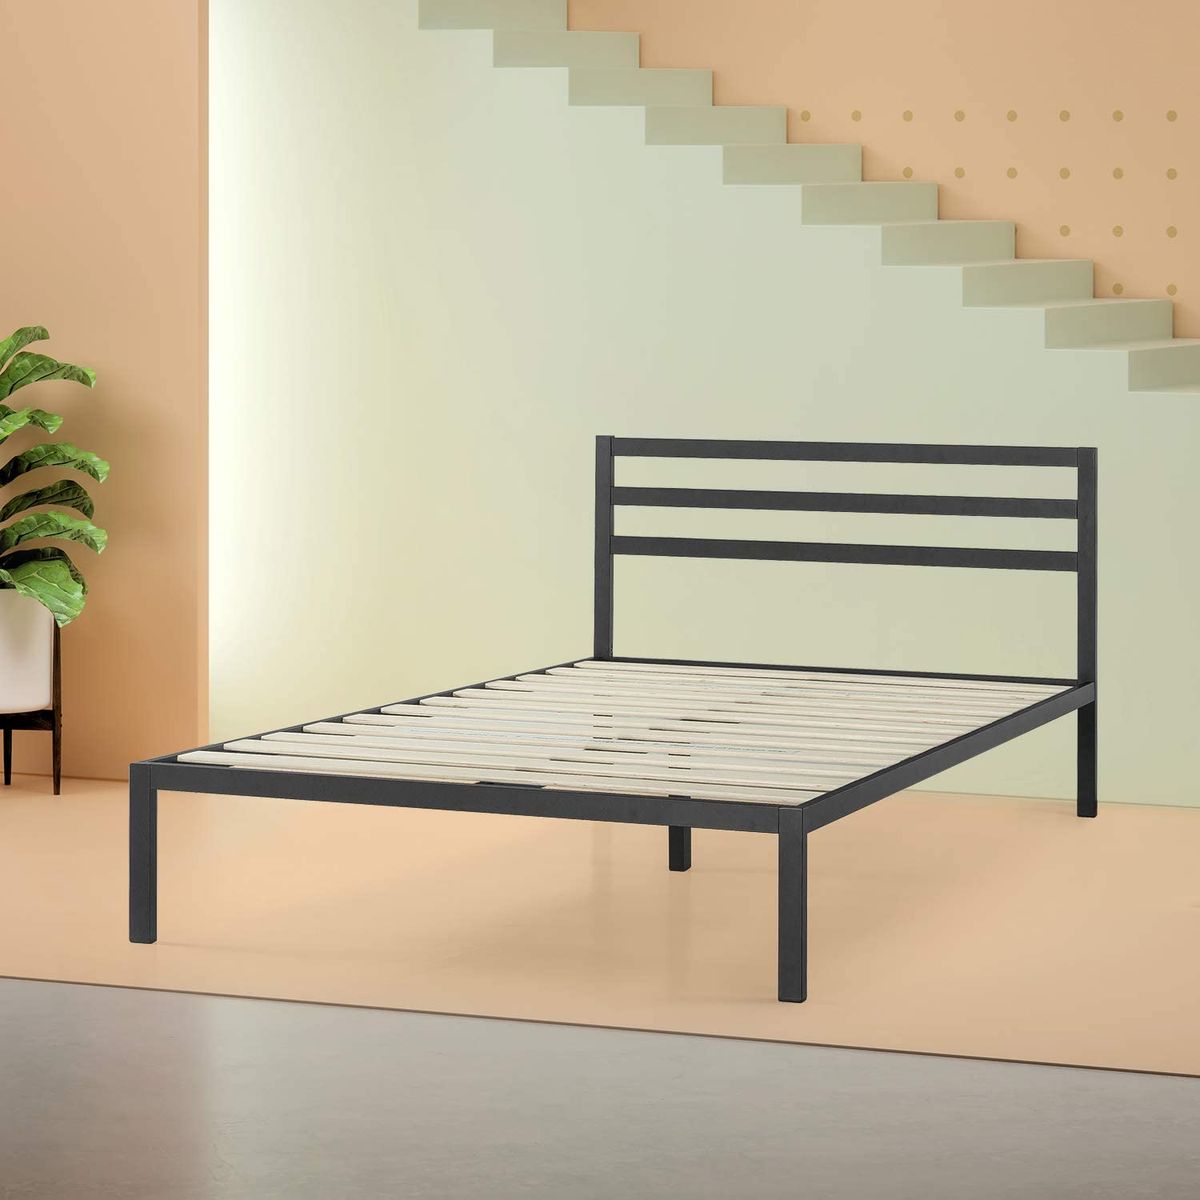 19 Best Metal Bed Frames 2020 The, How Do You Attach A Wooden Headboard To Metal Bed Frame